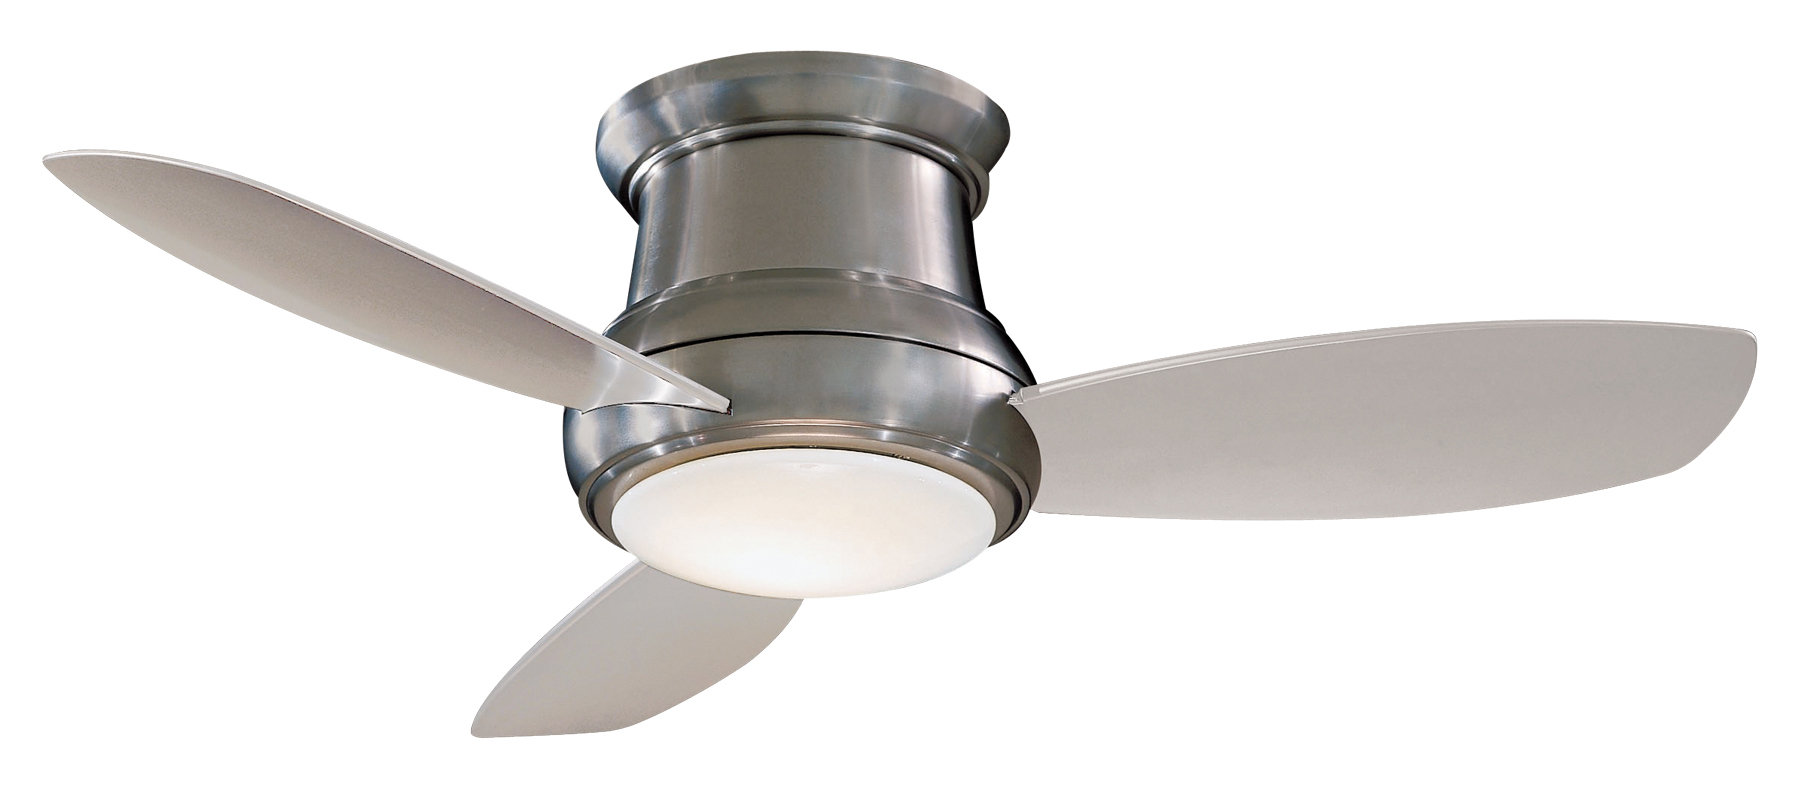 Agricultural Ceiling Fans 10 Useful Helpers In The